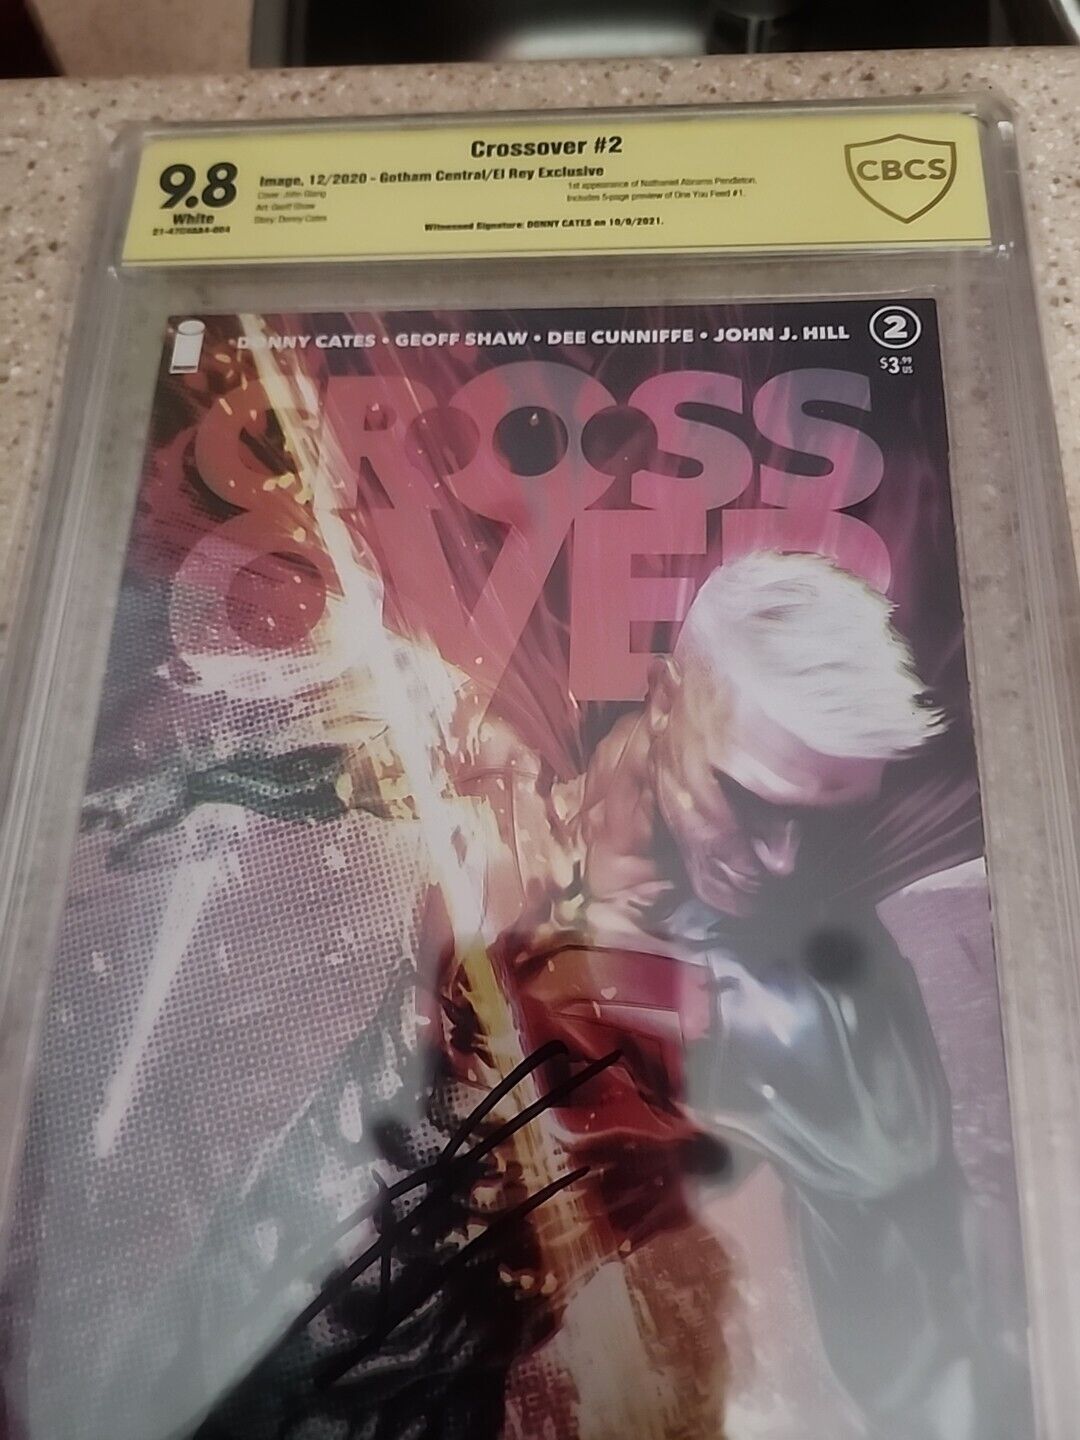 Crossover 2 El rey Exclusive Cbcs 9.8  dual signed cates and giang